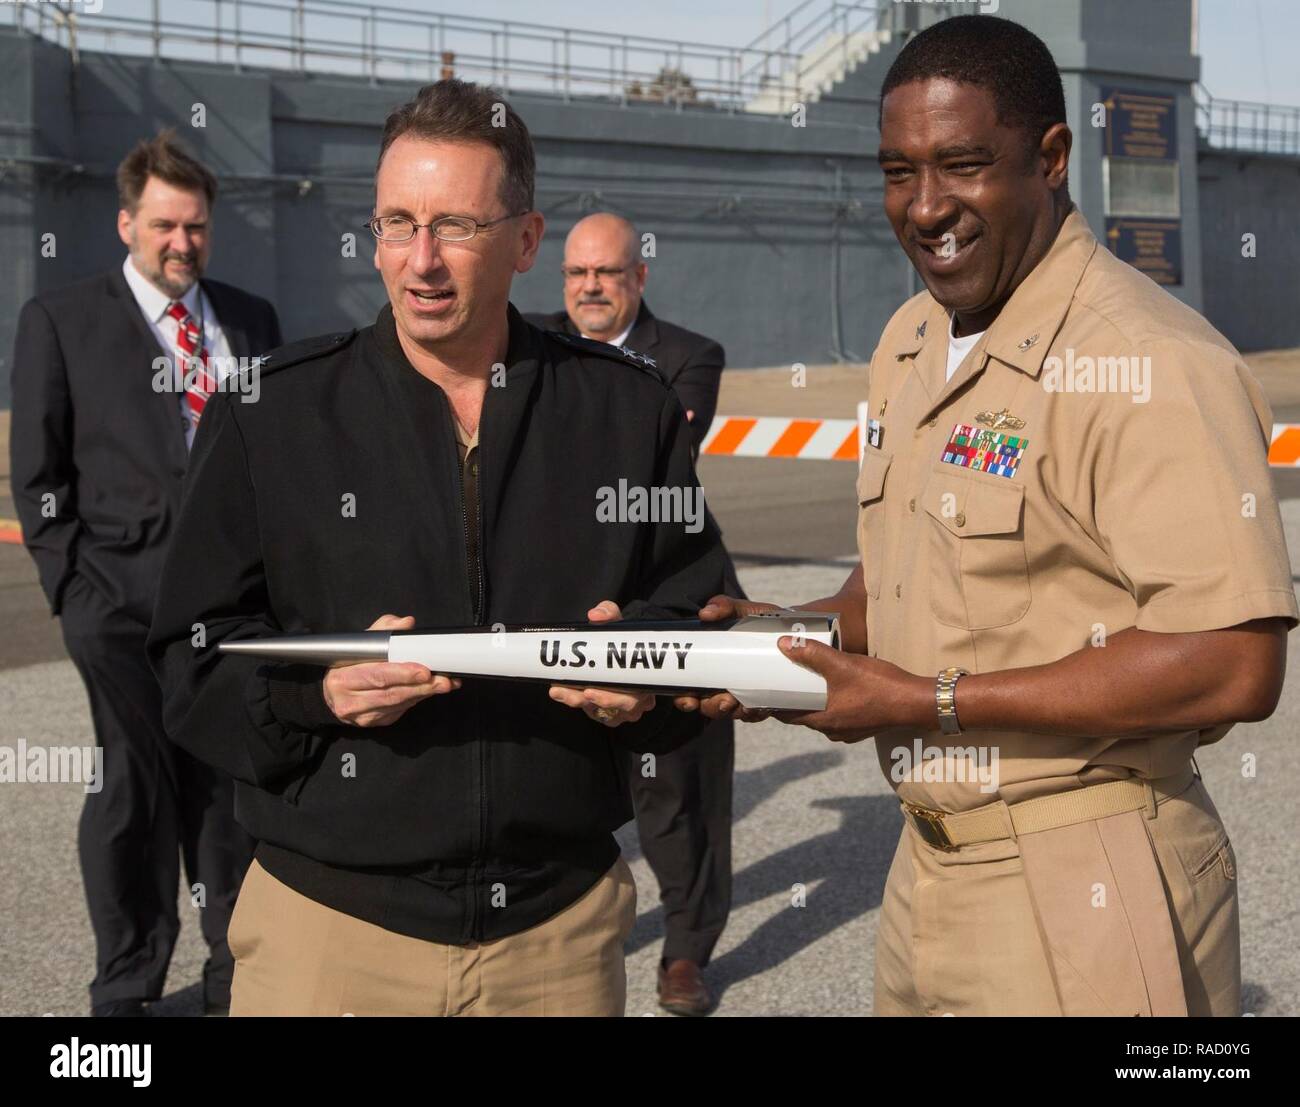 dahlgren-va-rear-admiral-david-hahn-chief-of-naval-research-and-capt-godfrey-gus-weekes-nswcdd-commanding-officer-hold-an-electromagnetic-railgun-projectile-during-hahns-visit-to-nswcdd-jan-12-the-admiral-led-his-office-of-naval-research-onr-delegation-to-see-new-and-emerging-onr-sponsored-technologies-developed-at-nswcdd-including-directed-energy-and-the-electromagnetic-railgun-they-also-watched-engineers-fire-a-hypervelocity-projectile-from-a-5-inch-62-caliber-open-mount-gun-at-the-potomac-river-test-range-RAD0YG.jpg